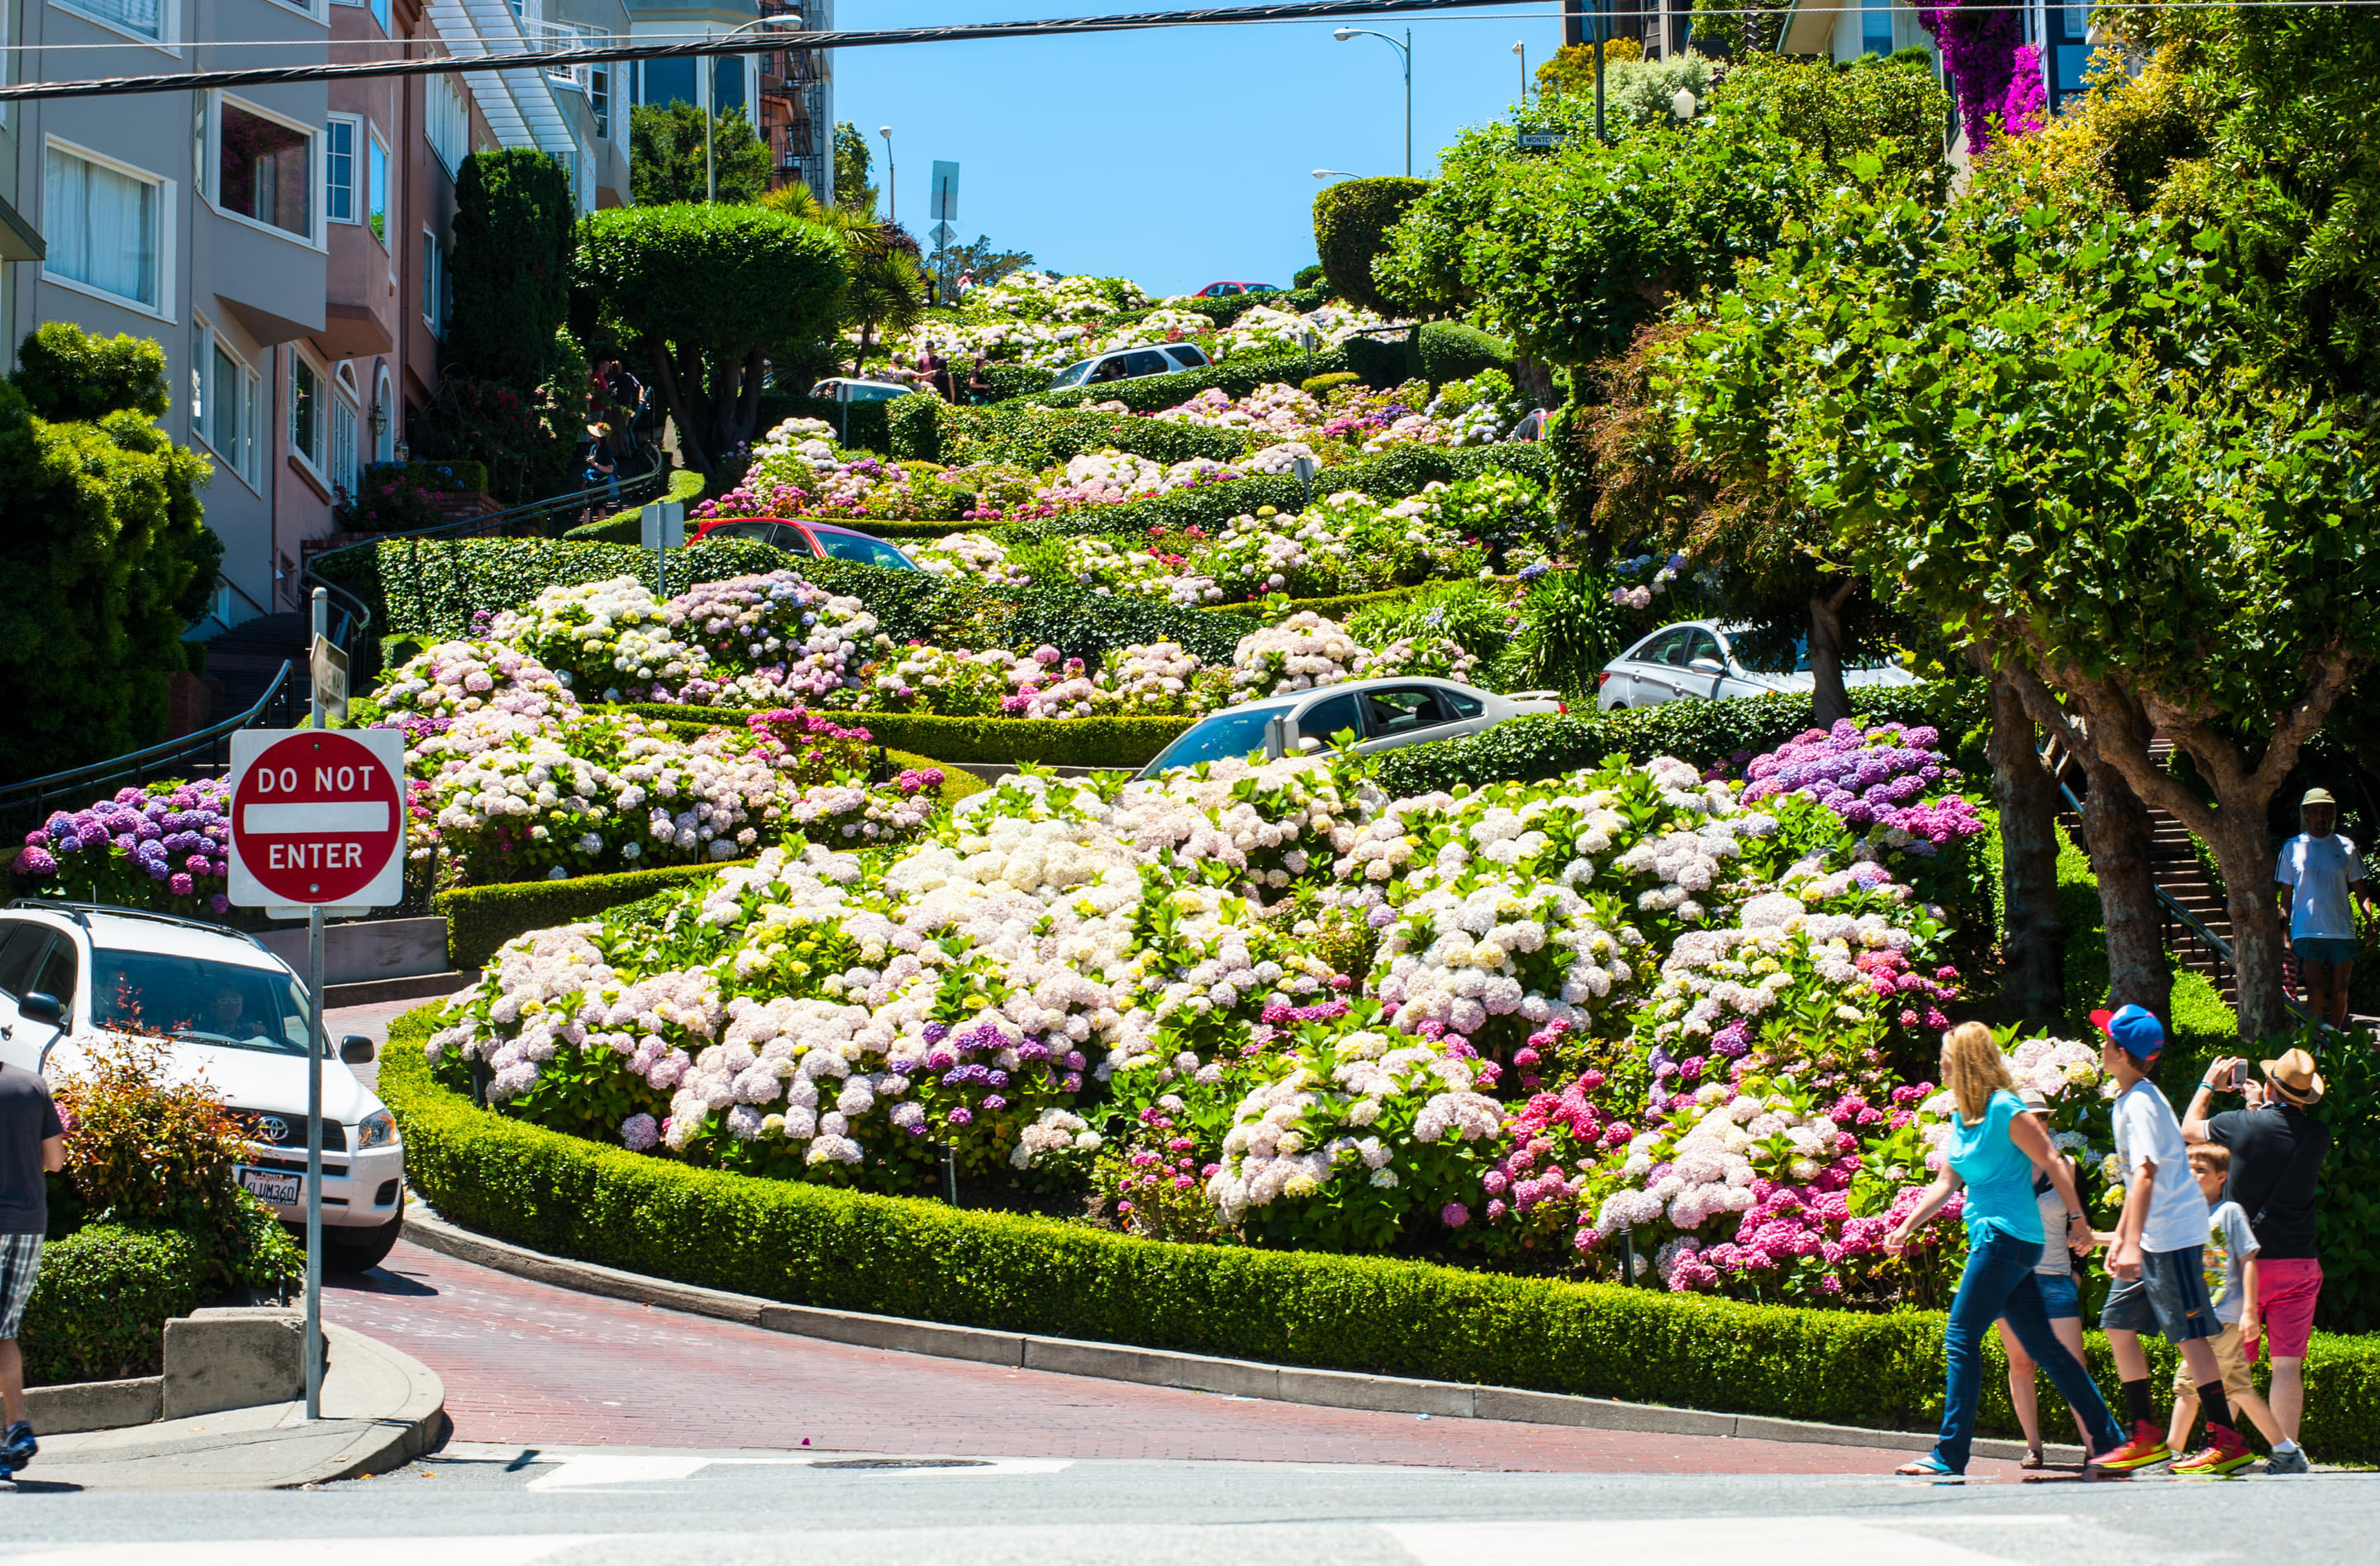 Lombard Street Overview